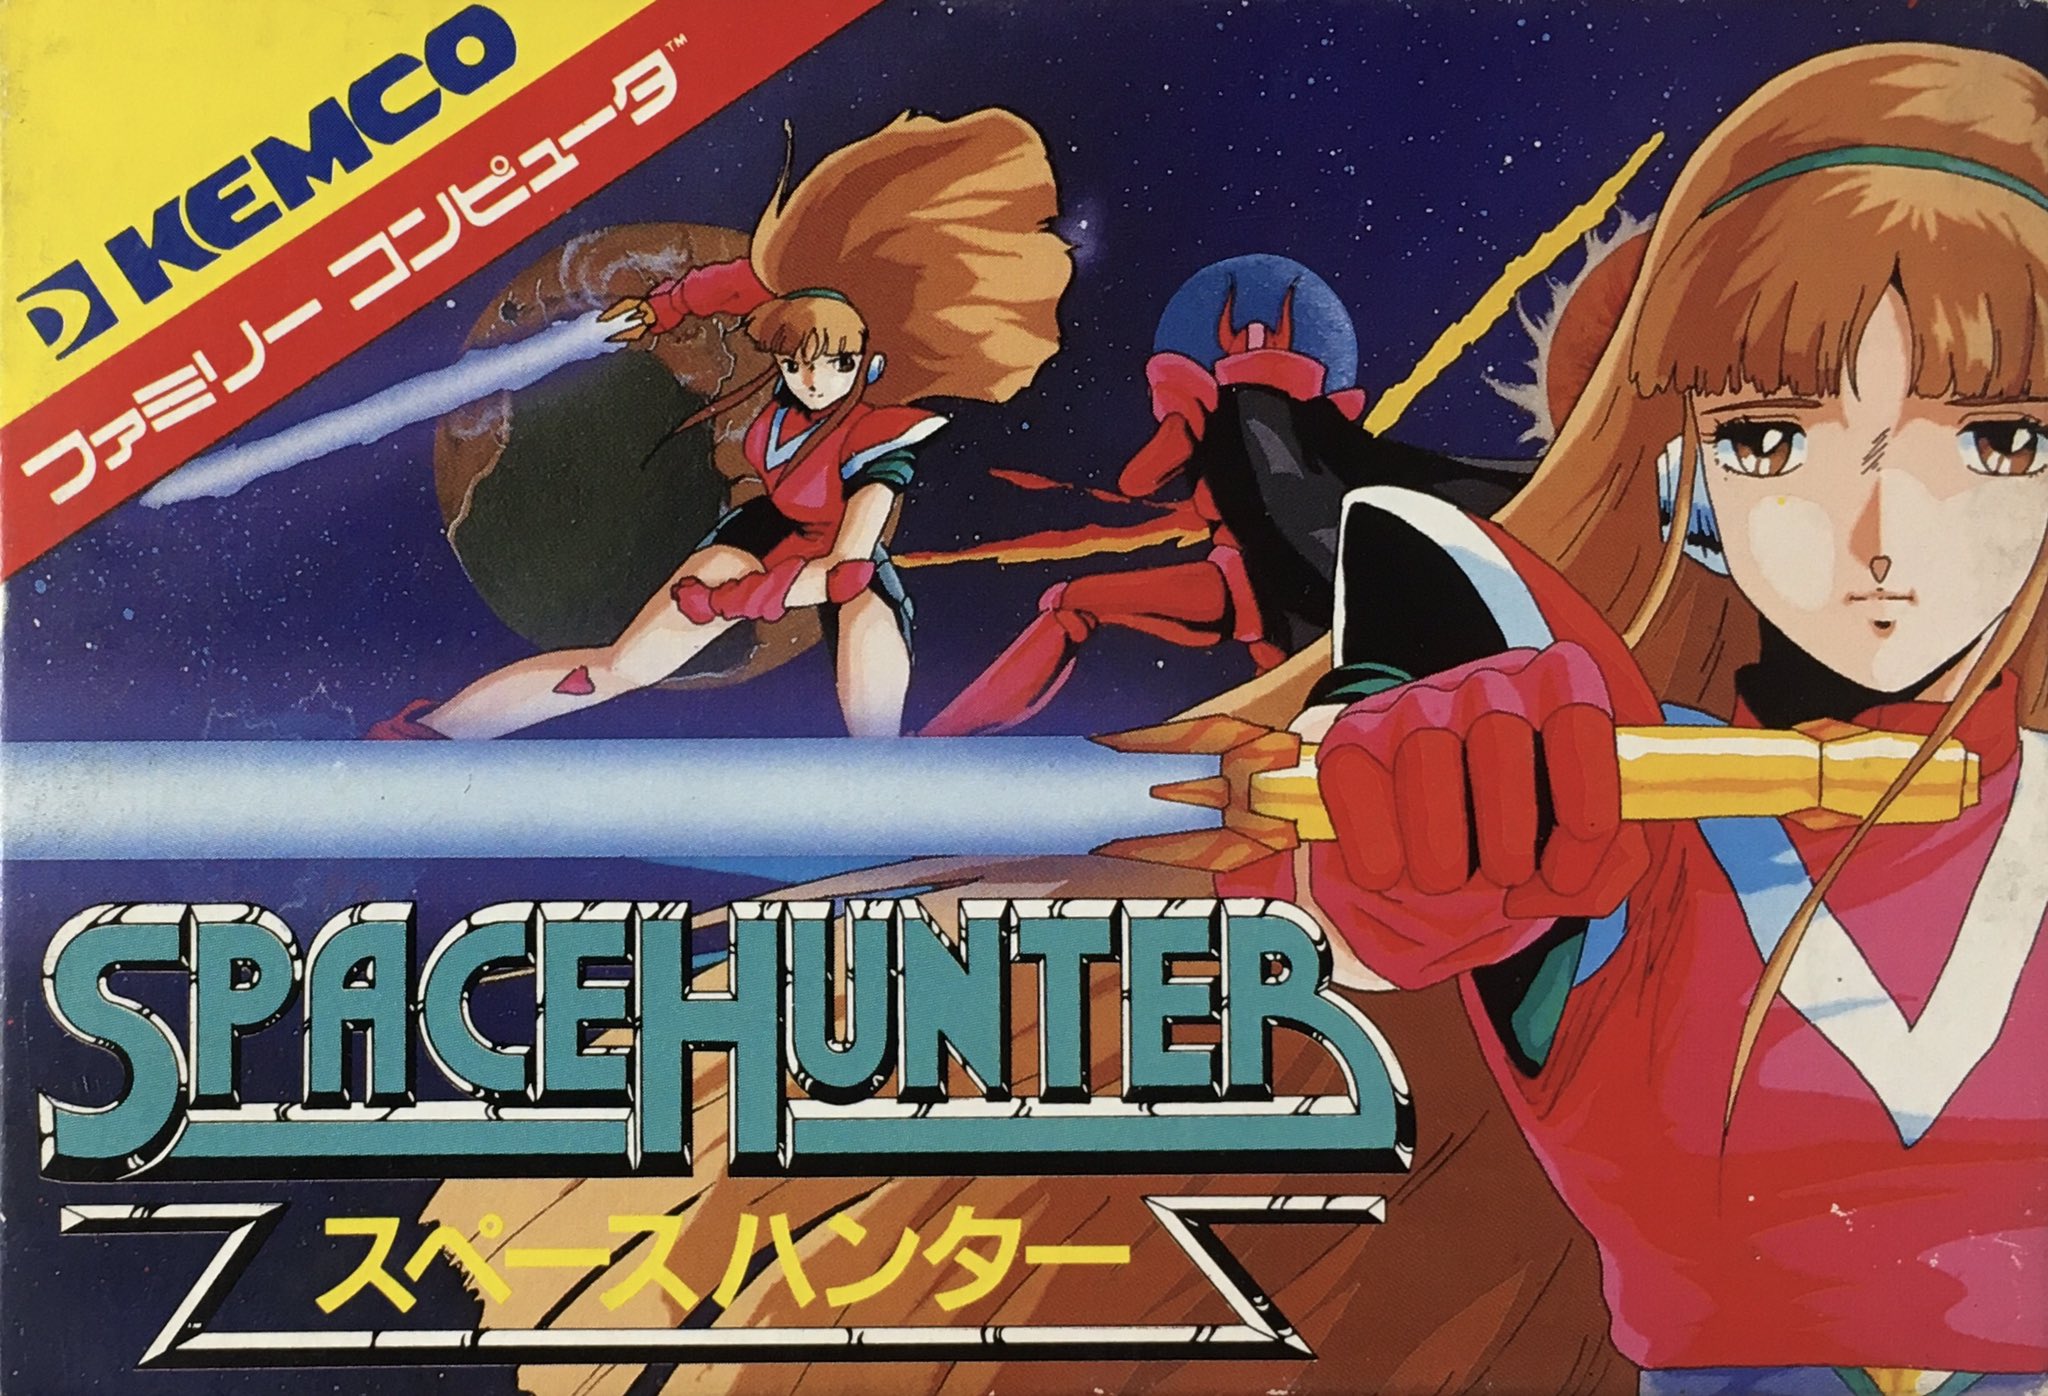 Space hunter. Space Hunter NES. Денди Space Hunter. NES 1986. Space Chaser игра.